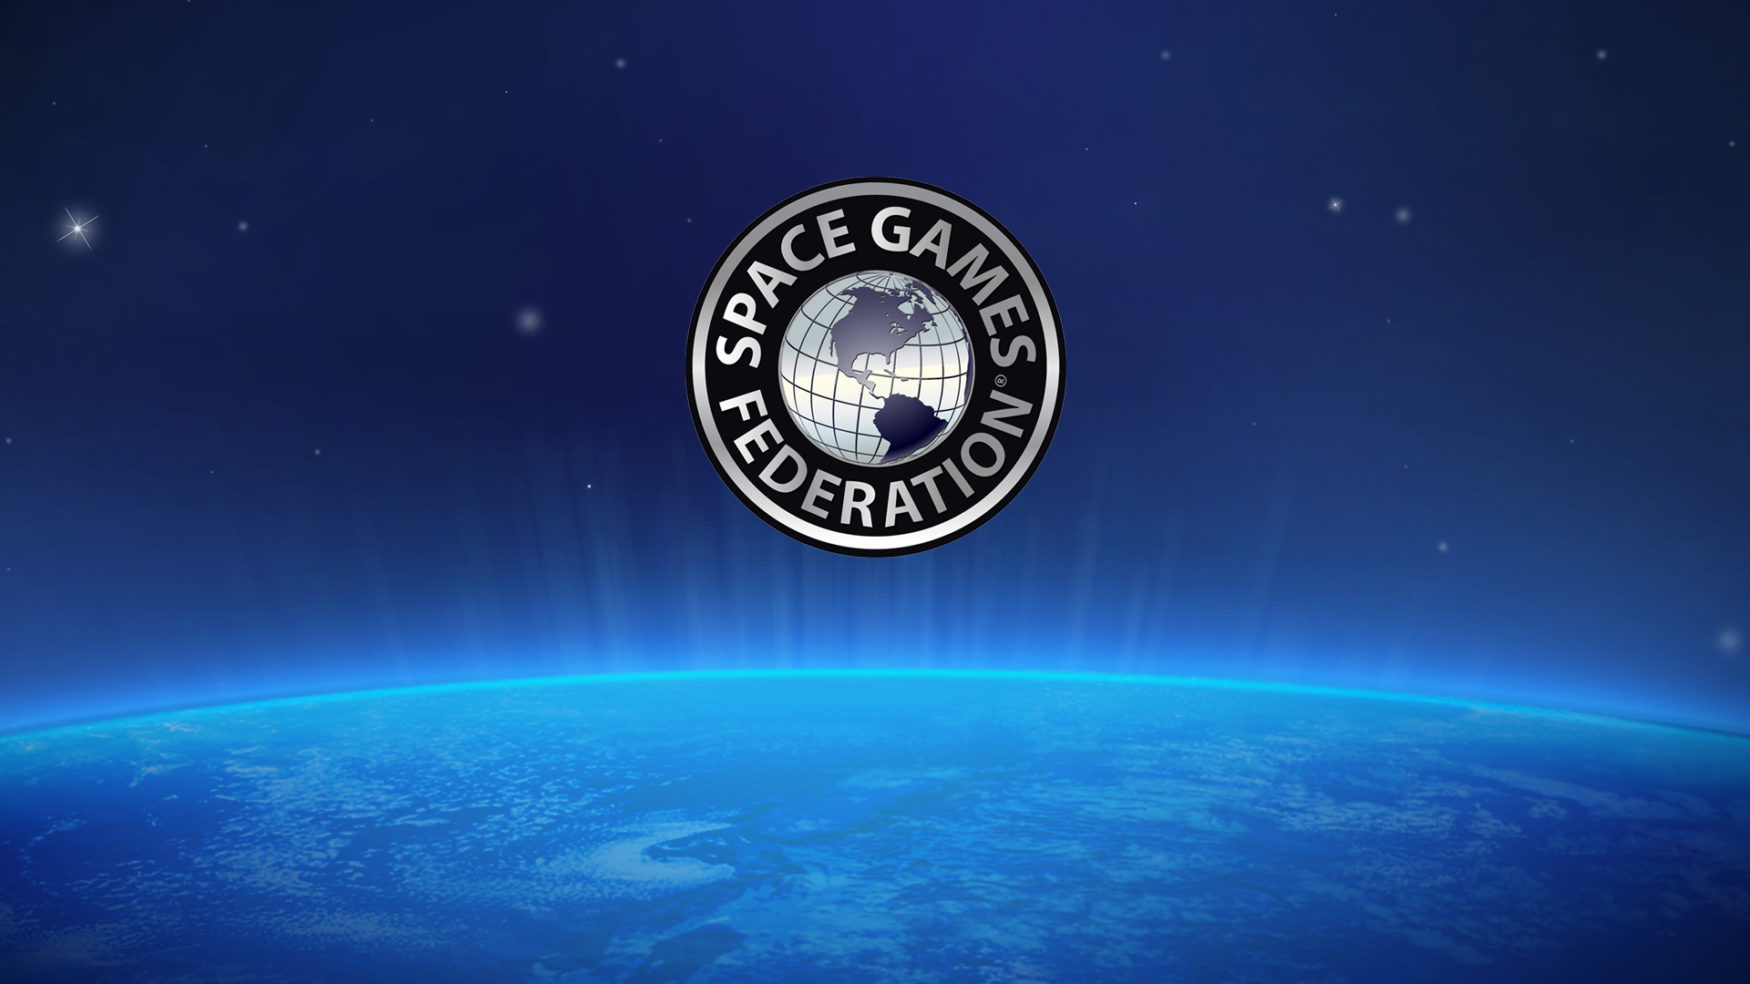 About Space Games Federation®